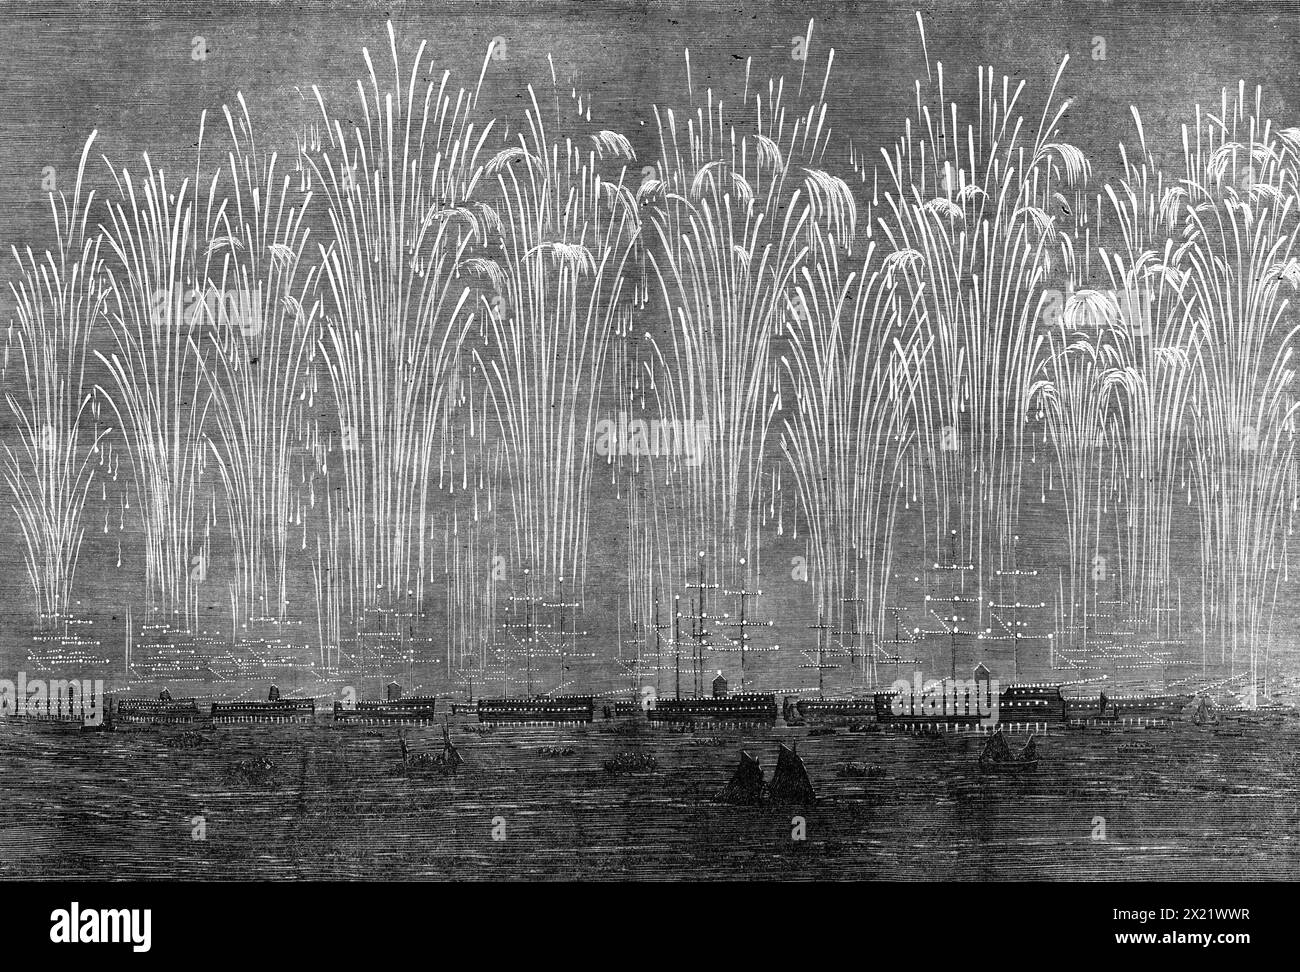 The International Naval Festival at Portsmouth: flight of rockets and illumination of the Allied Fleets at Spithead, 1865. 'As if by magic...every ship in the two squadrons was so illuminated, by means of red, white, and blue lights placed in every port, at both broadsides, and both yardarms, that the object which only a few moments before looked...so grim and shadowy became at once transformed into a ship of light, revealing to view the outline of her slenderest spar. Rockets were then sent up in clusters from the whole of the fleet, which, as they burst in the heavens, expanded into bouquets Stock Photo